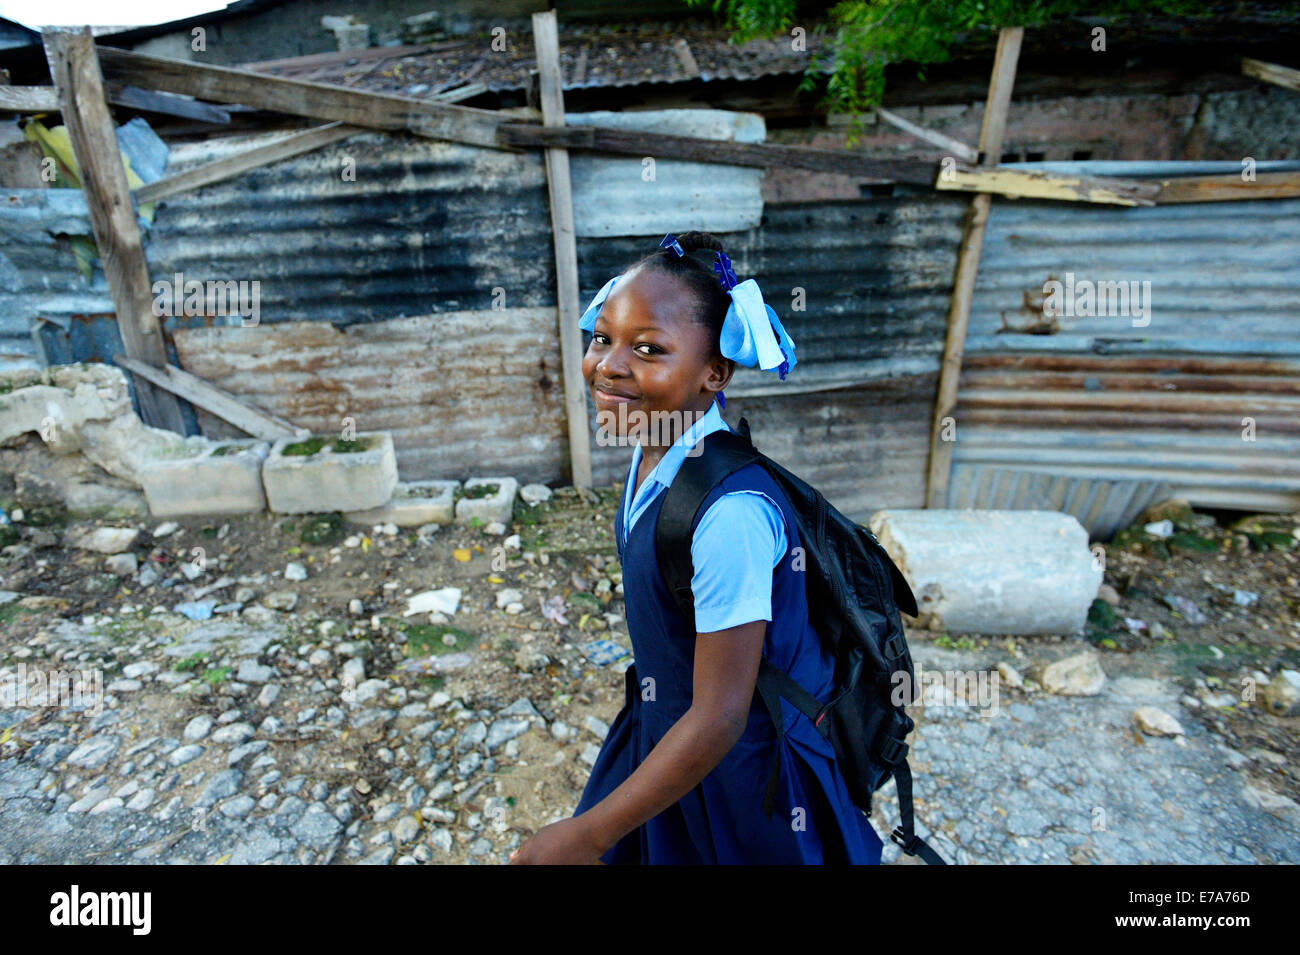 Girl, 9 years, on her way to school, Camp Icare for earthquake refugees, Fort National, Port-au-Prince, Haiti Stock Photo